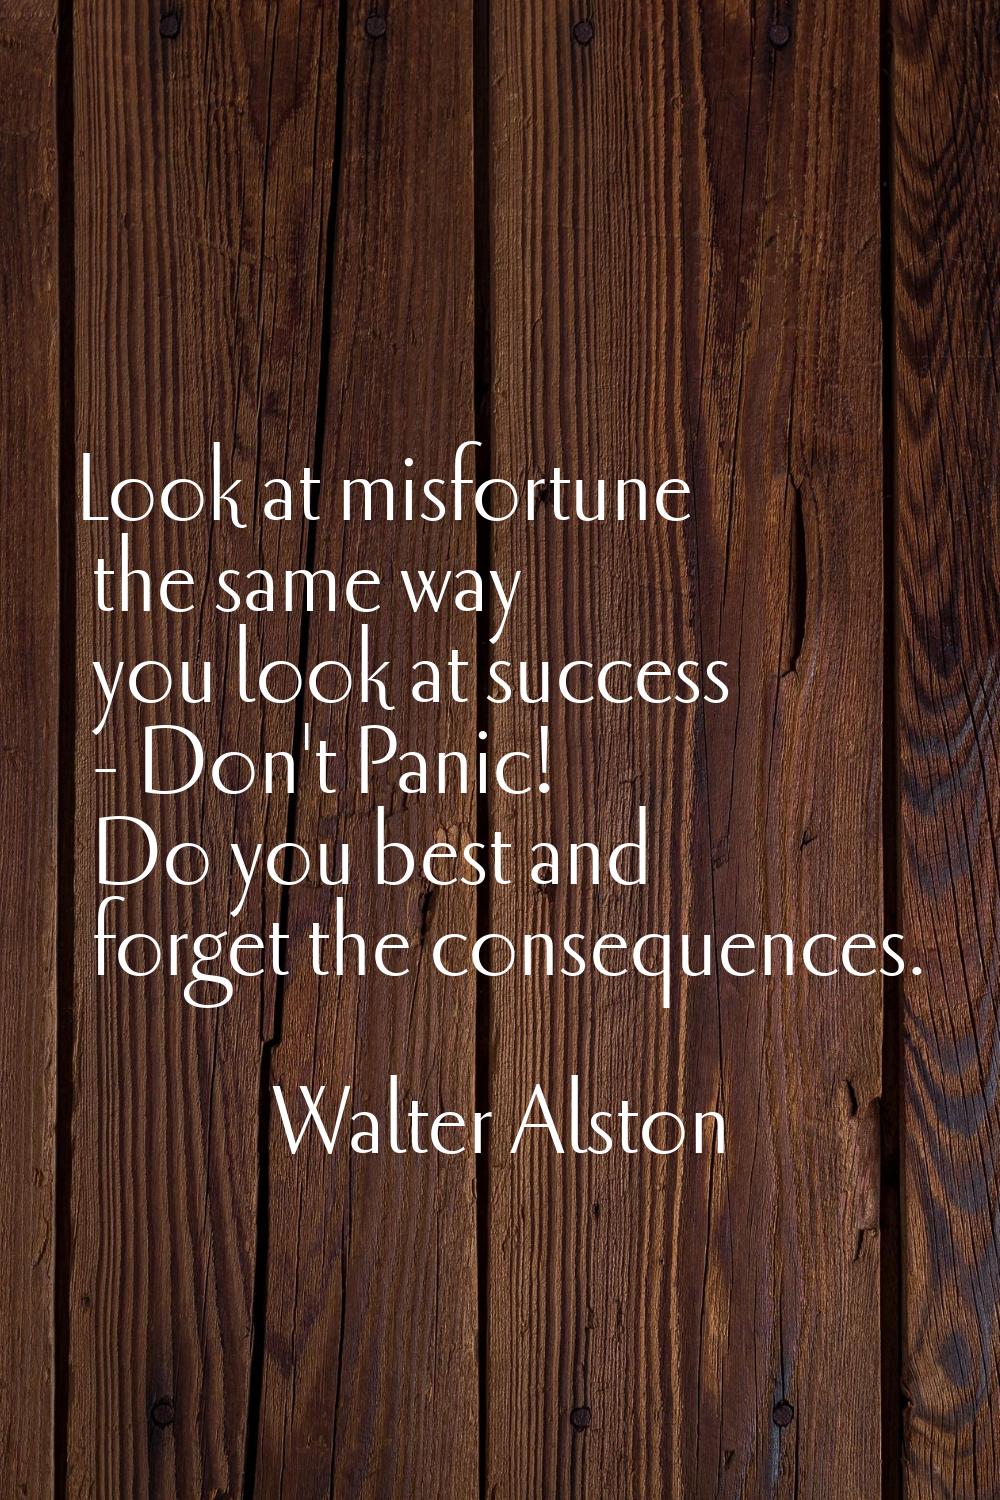 Look at misfortune the same way you look at success - Don't Panic! Do you best and forget the conse